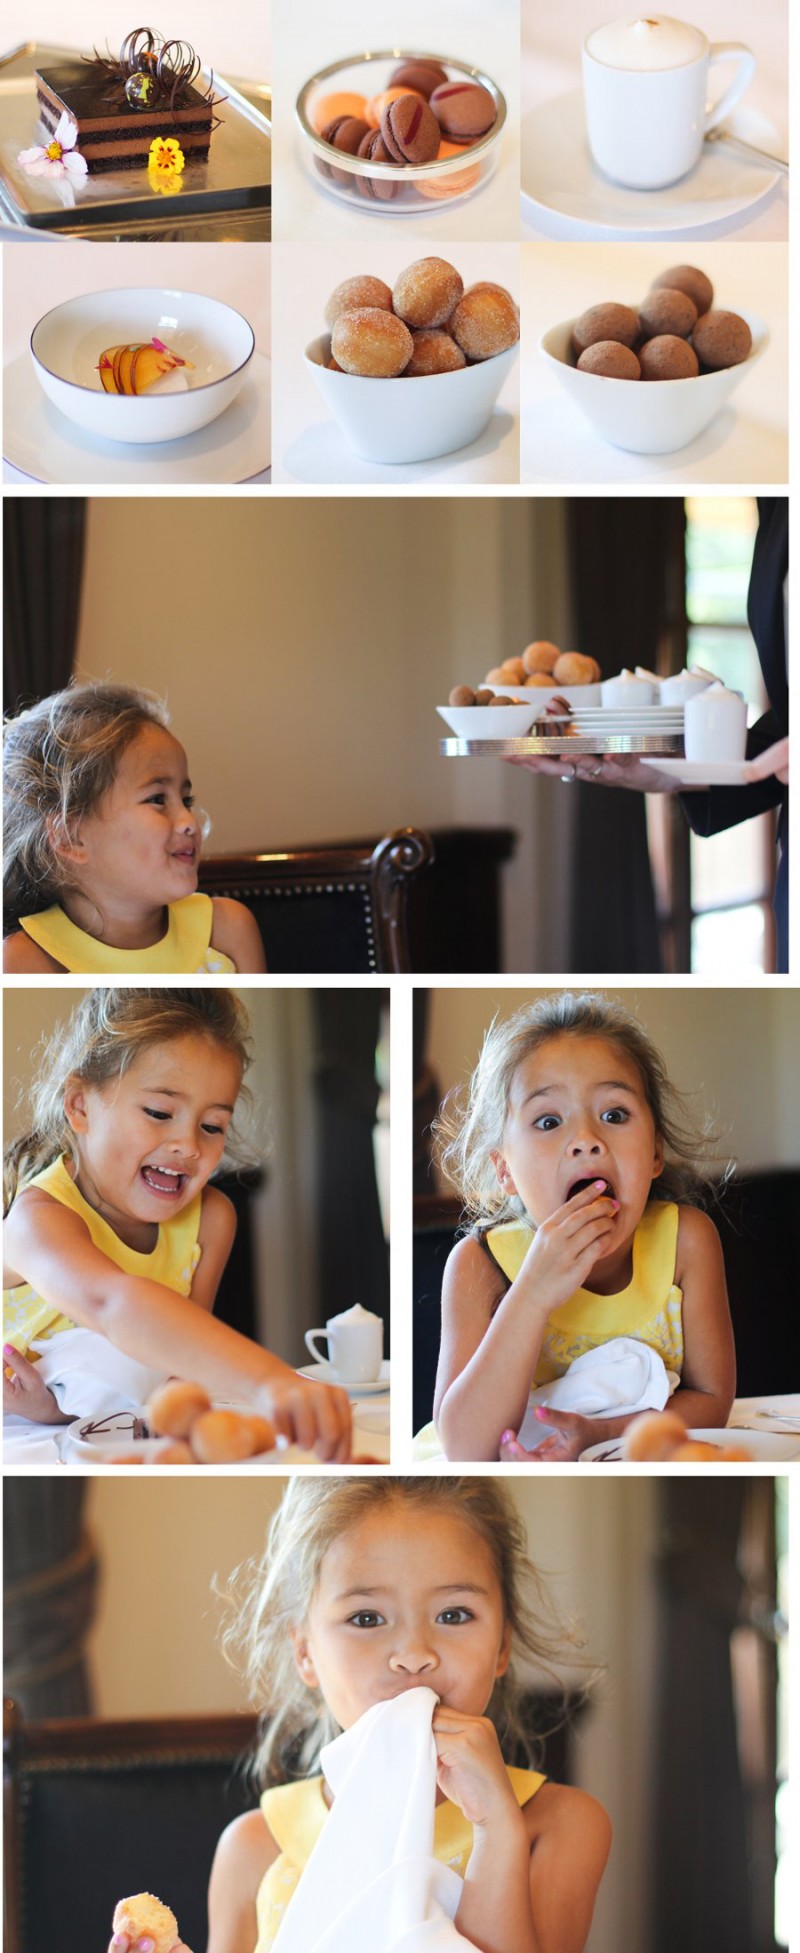 A Four-Year-Old Reviews the French Laundry 15